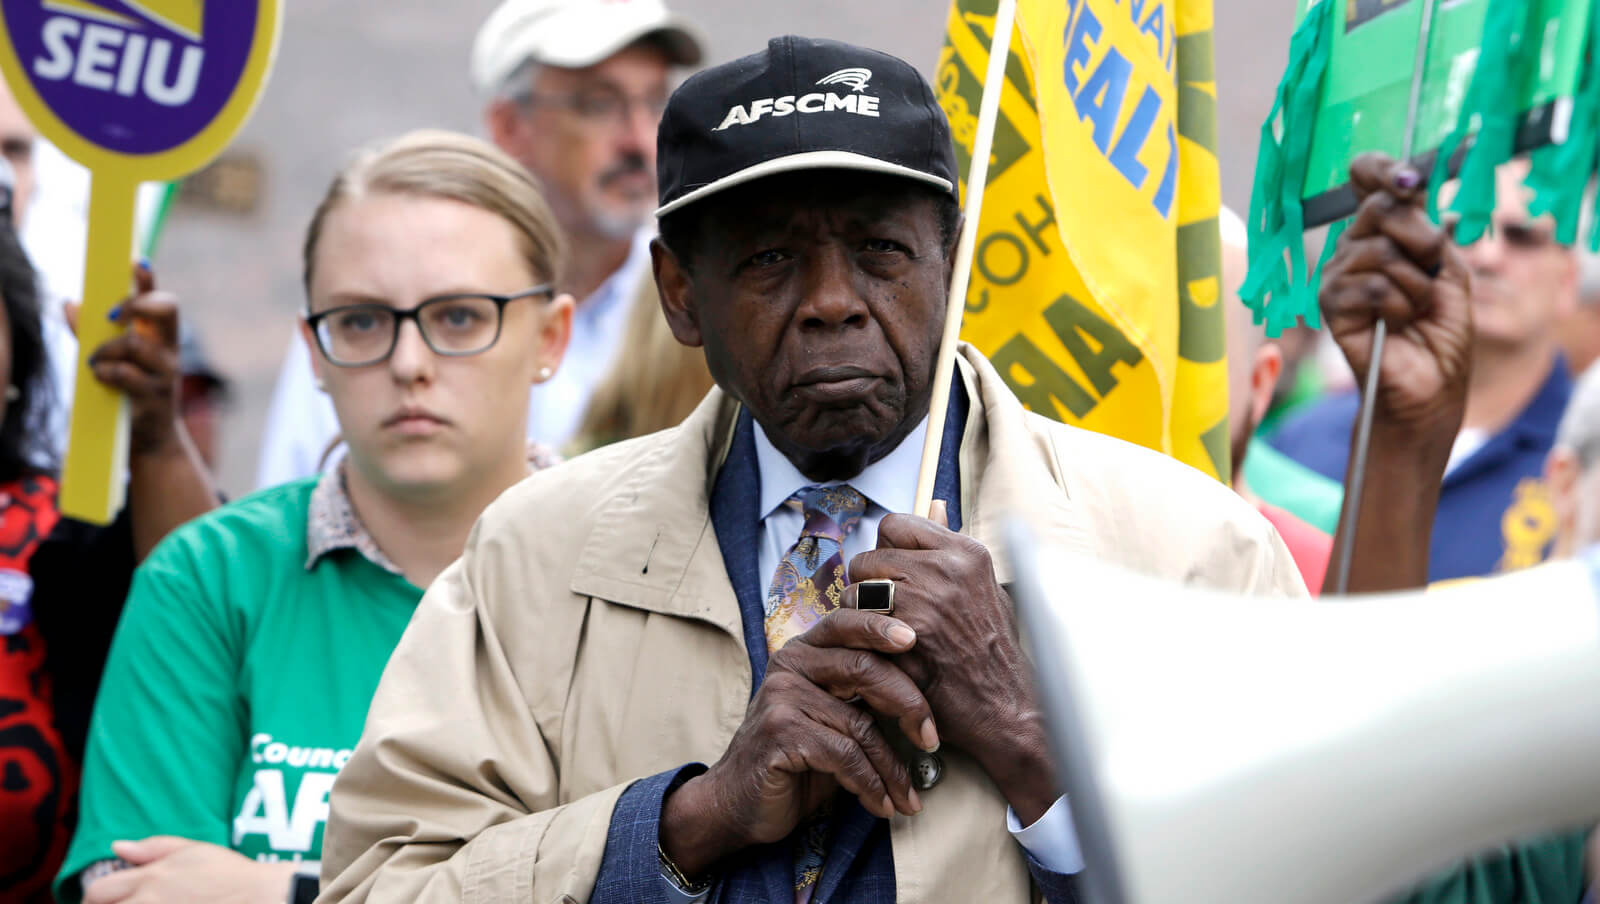 Henry Nicholas, president of the National Union of Hospital and Health Care Employees, attends a protest by Philadelphia Council AFL-CIO on Wednesday, June 27, 2018, in Philadelphia. The protesters denounced Wednesday's U.S. Supreme Court ruling that government workers can't be forced to contribute to labor unions that represent them in collective bargaining, dealing a serious financial blow to organized labor. Jacqueline Larma | AP